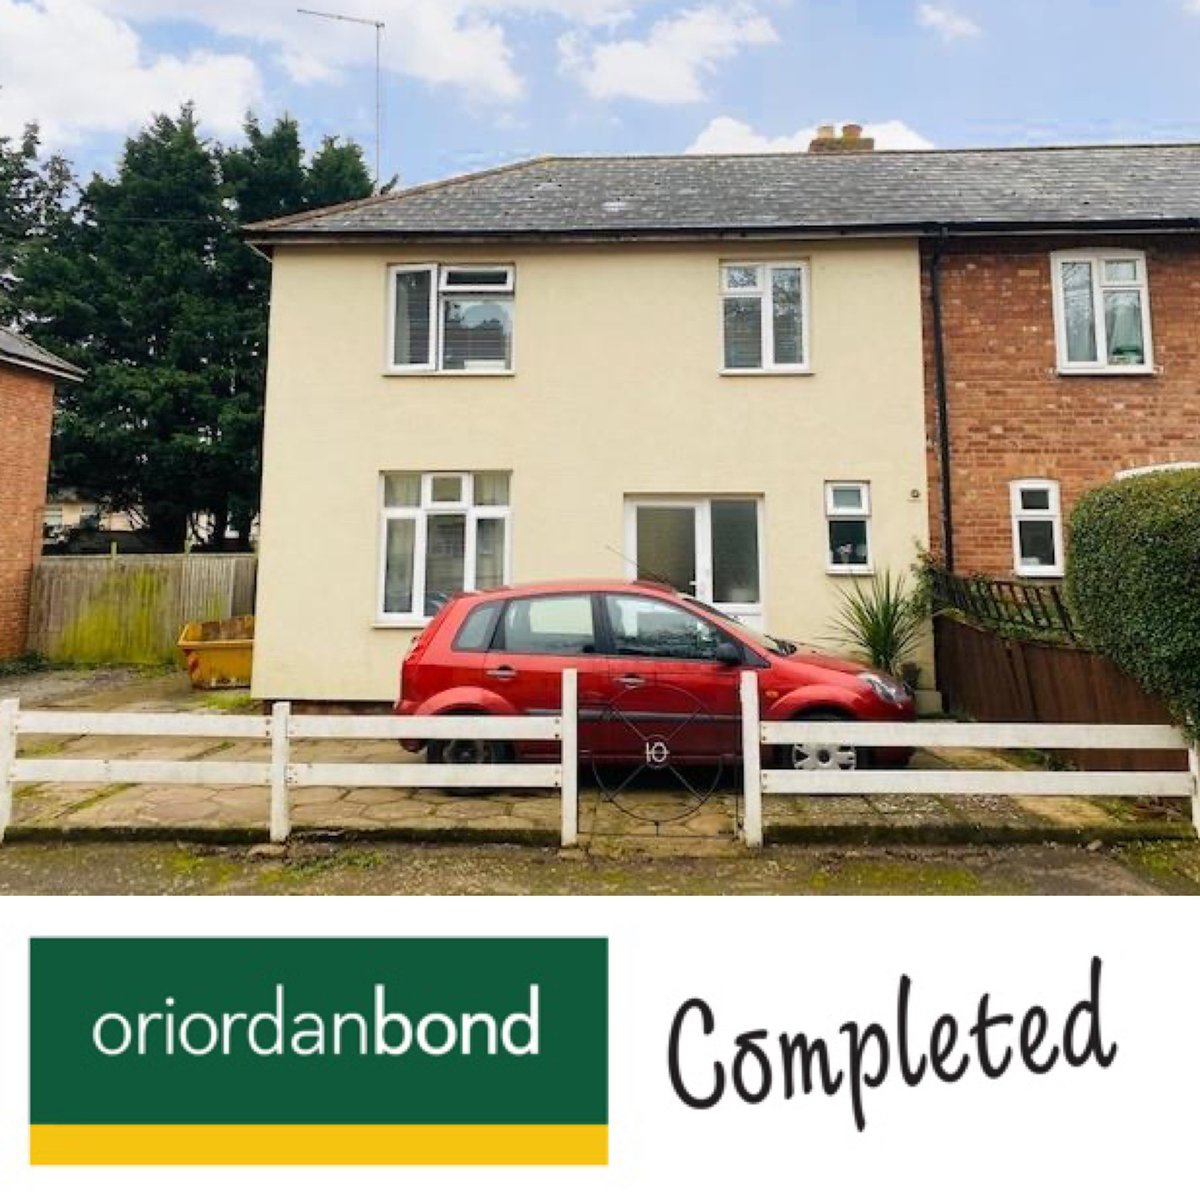 Sale agreed in 48 hours on this end of terrace property in Abington – close to Abington Park, Northampton.   We have a number of disappointed purchasers looking for similar so please contact our busy O’Riordan Bond Abington branch - 01604 639007 to arrange a free market appraisal